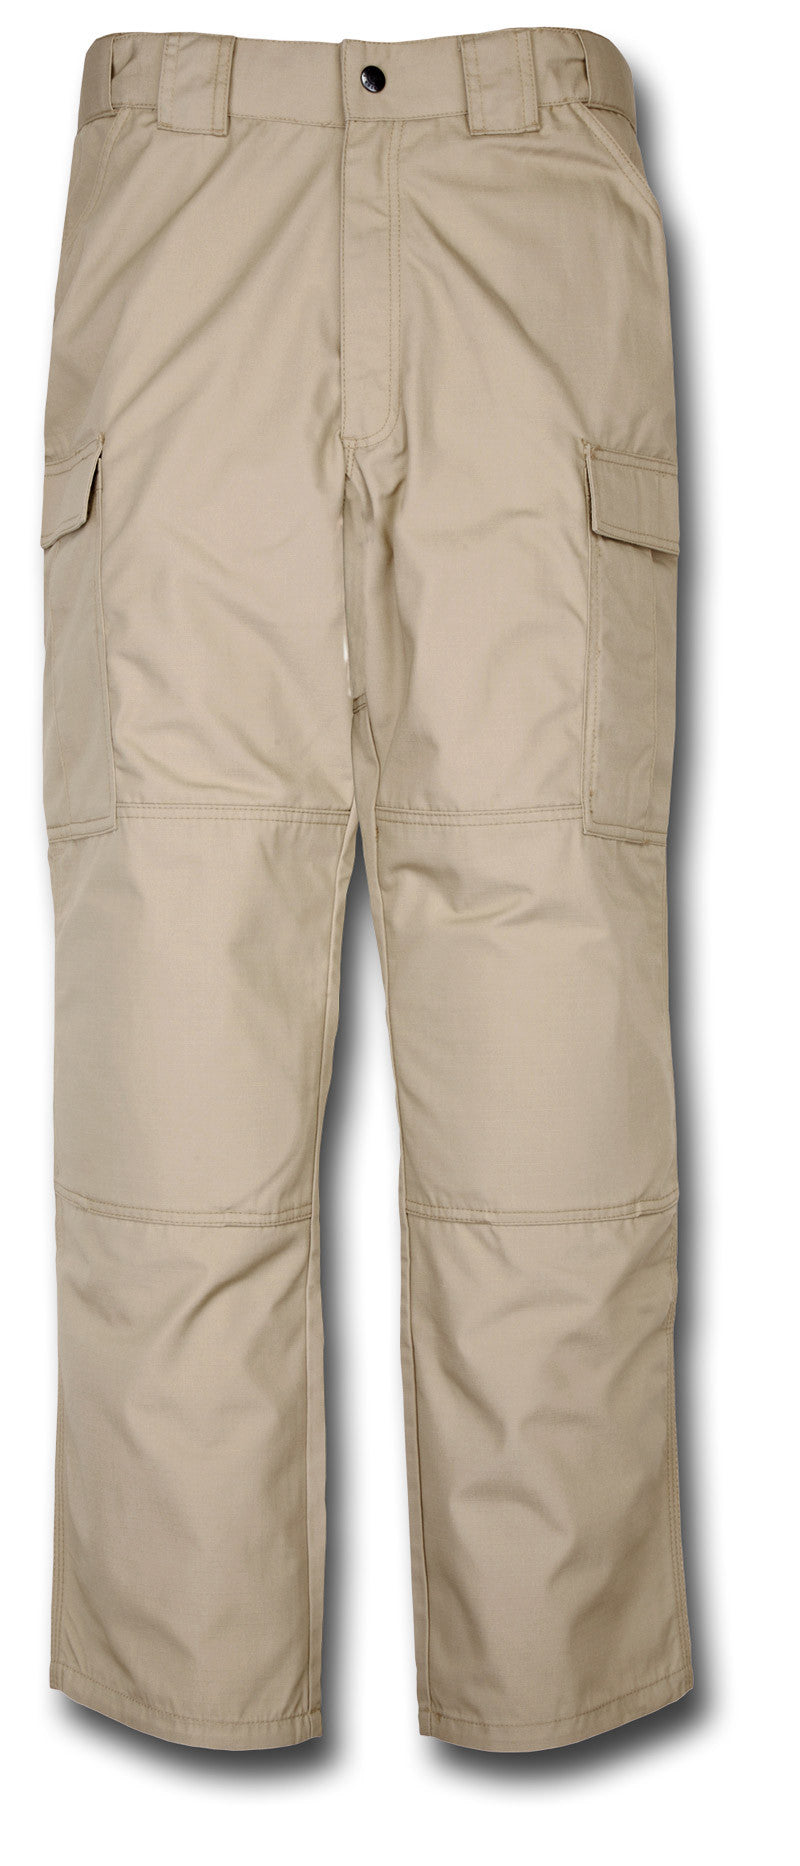 5.11 Trousers